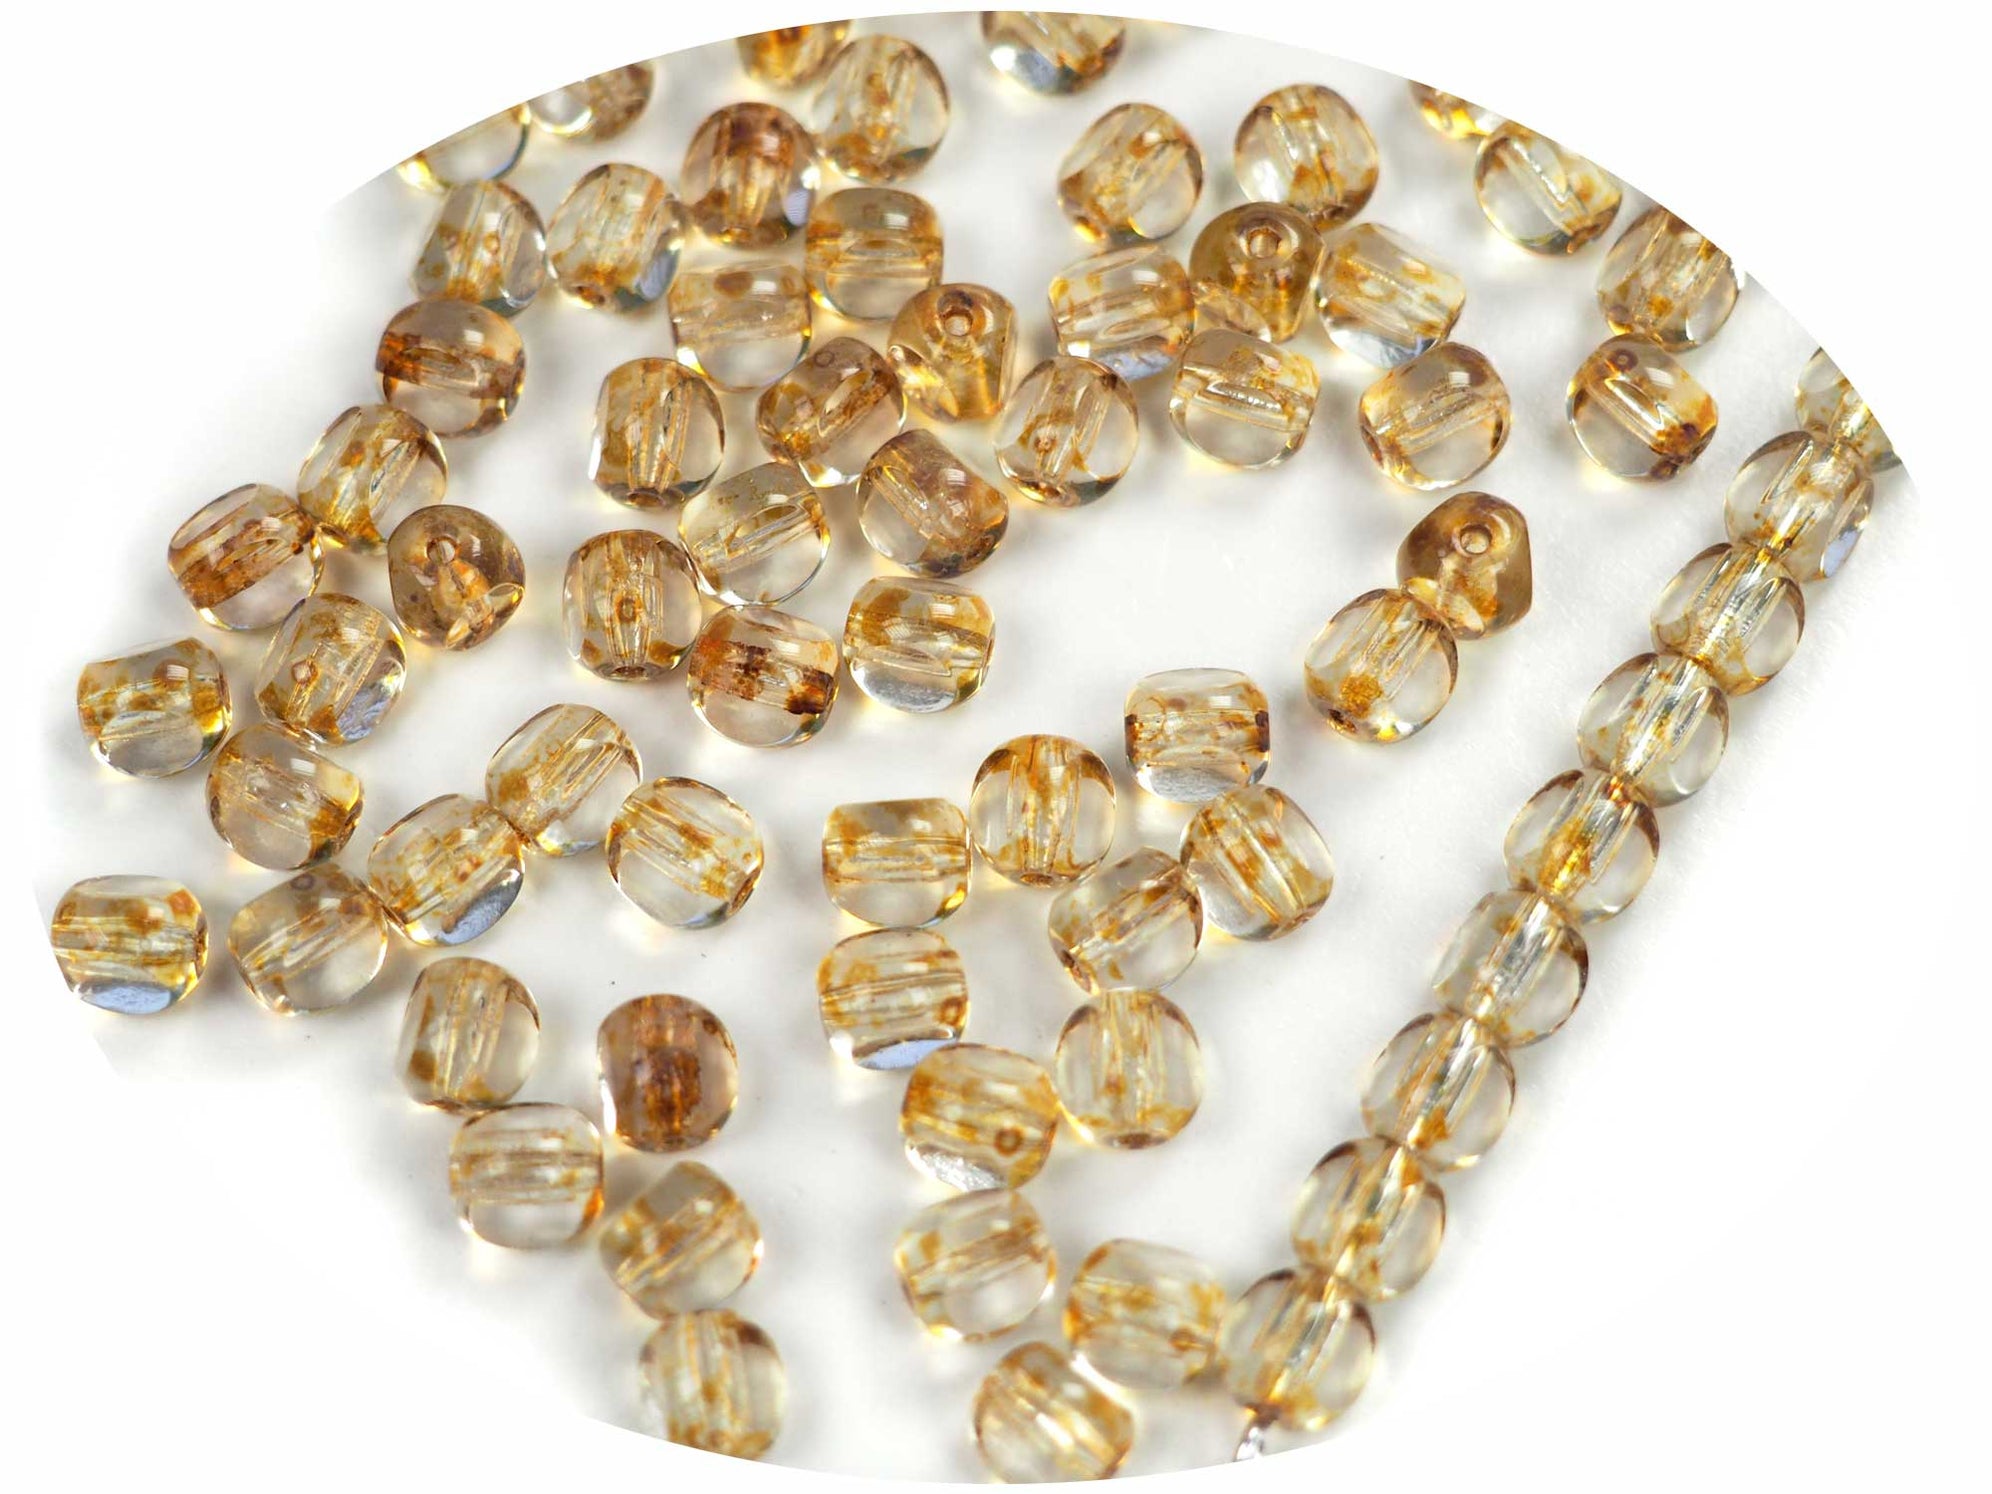 Czech Fire Polished Beads (Shapes) - Crystals and Beads for Friends